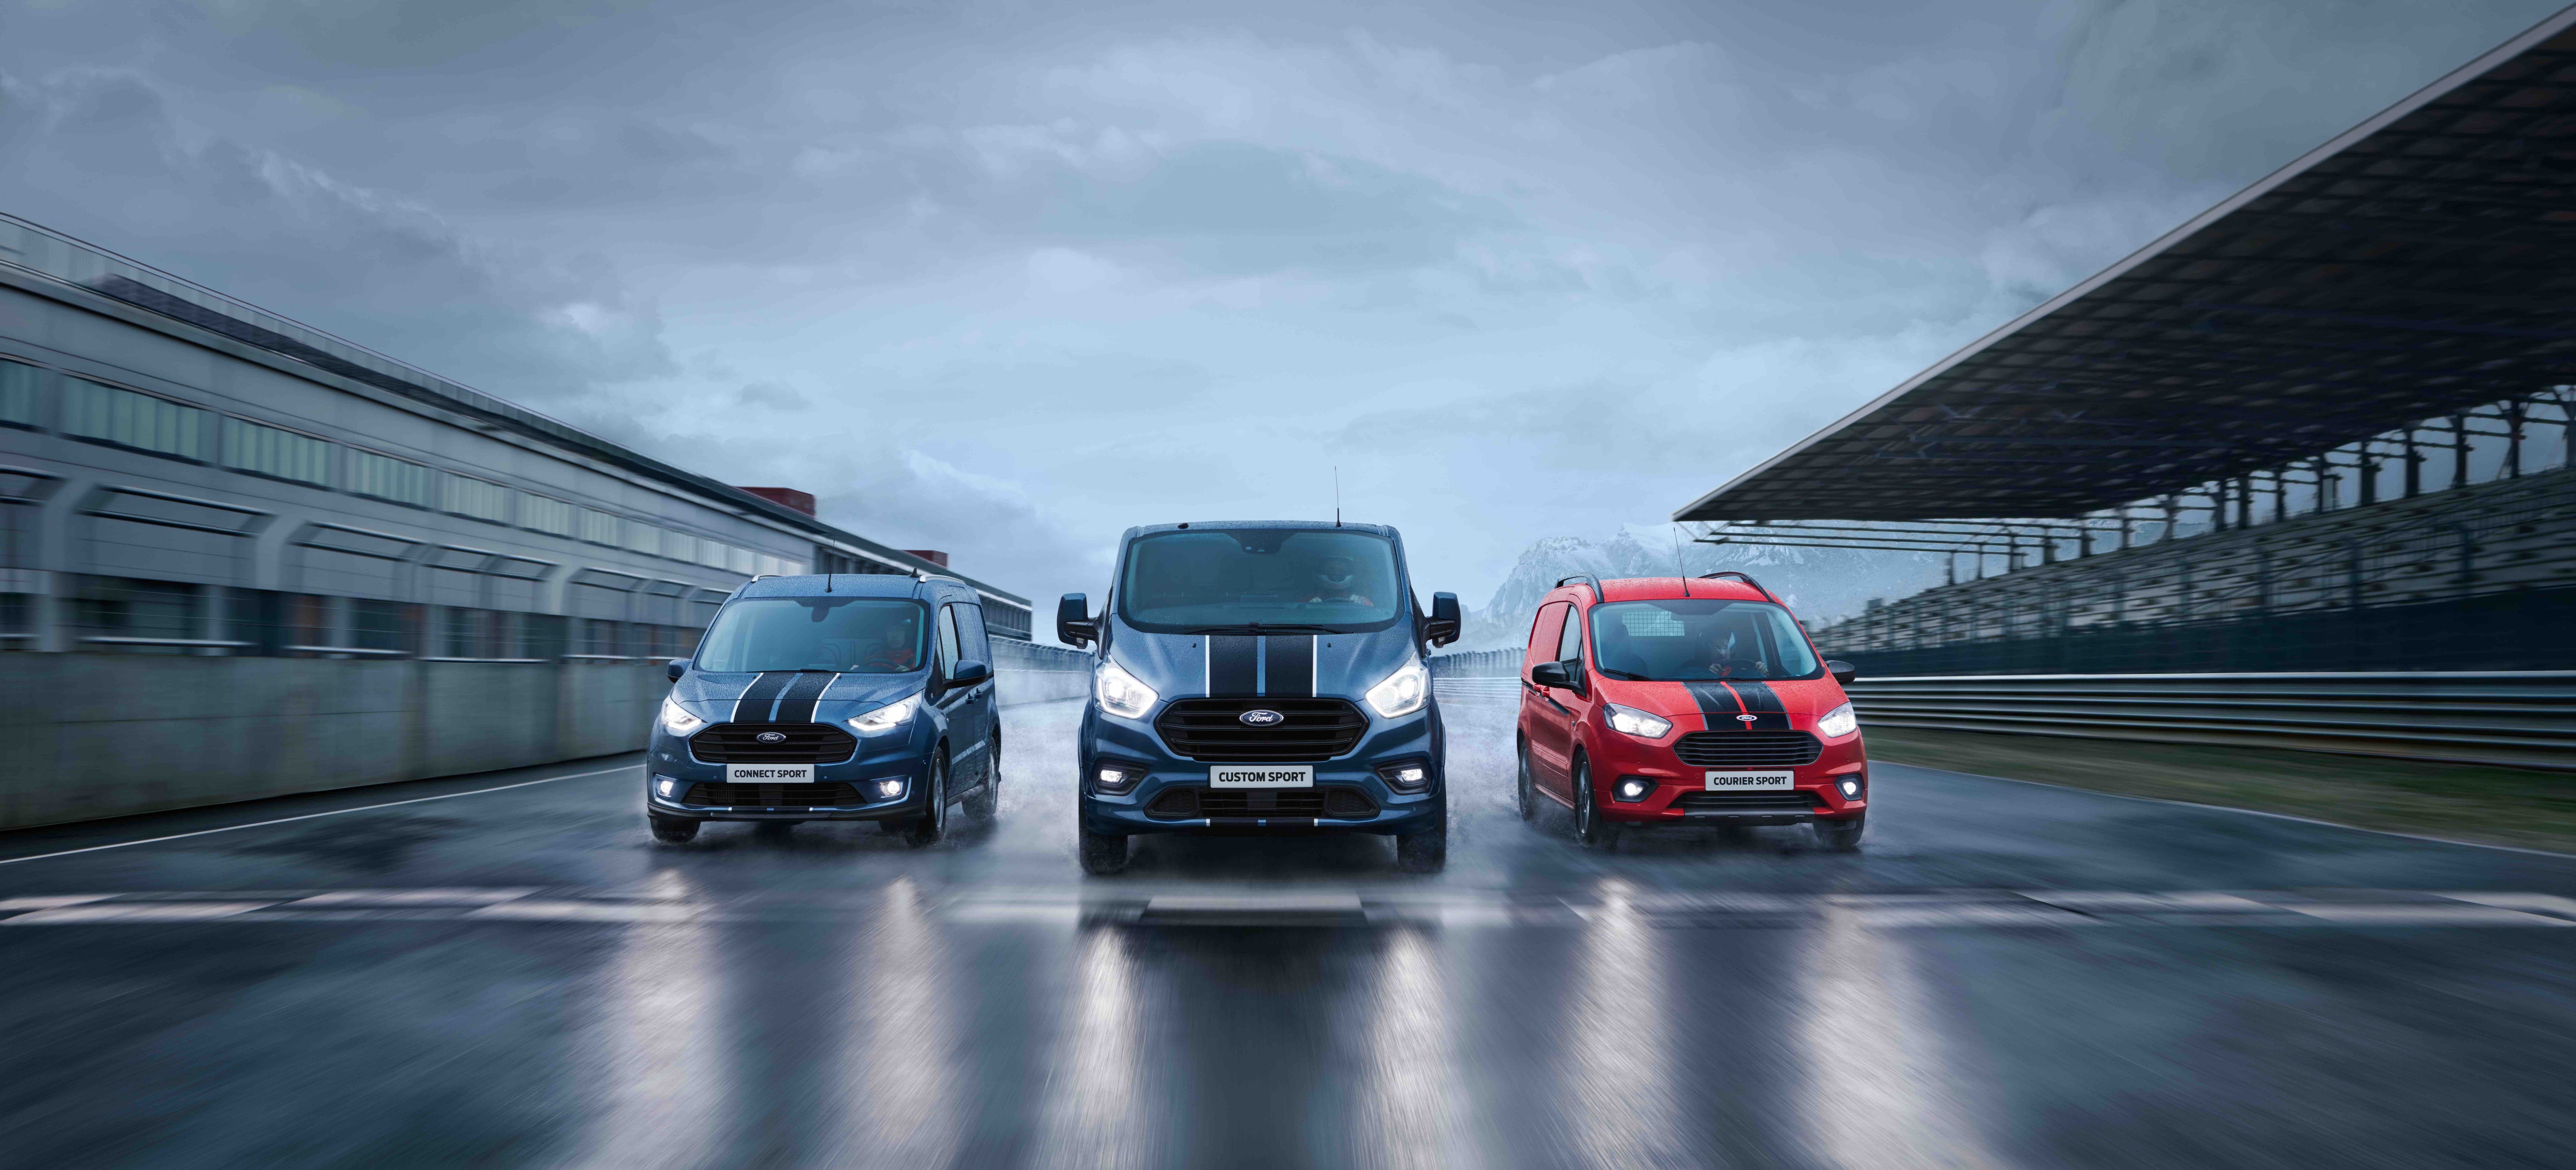 Most Powerful Ford Transit Sport Van Ever Heads Up Distinctive Three Model Line-up